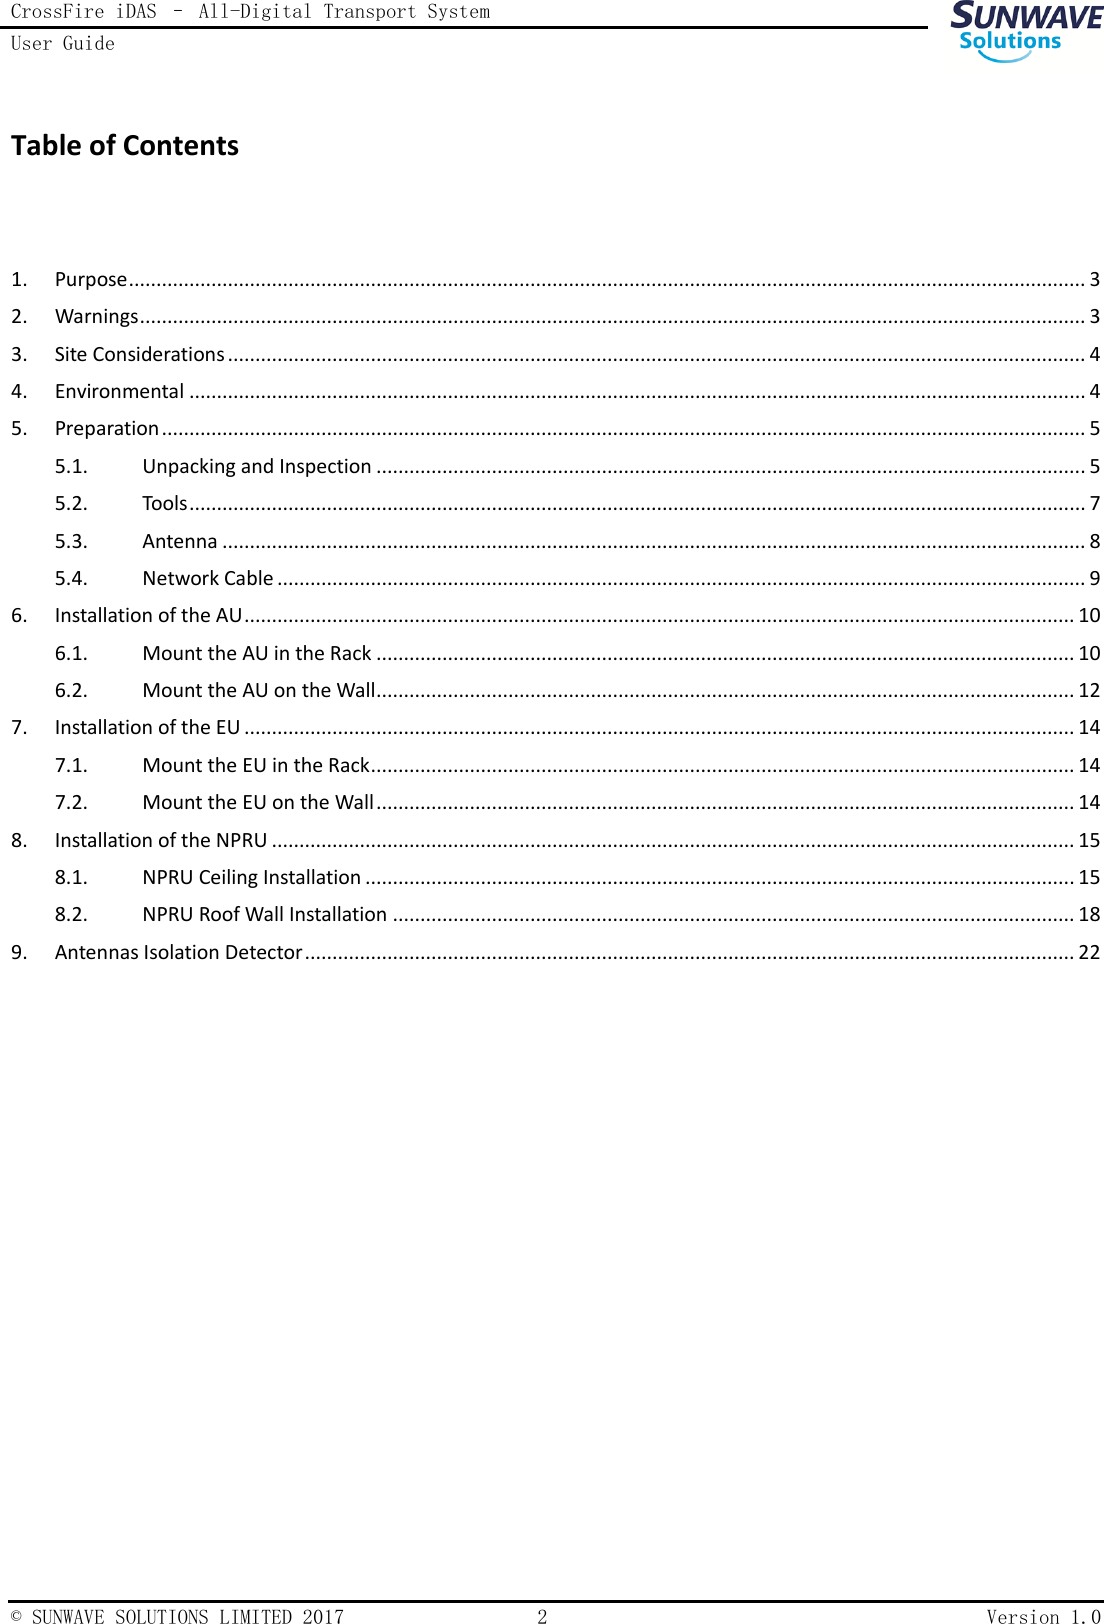 CrossFire iDAS – All-Digital Transport System User Guide    © SUNWAVE SOLUTIONS LIMITED 2017  2  Version 1.0  Table of Contents  1.  Purpose .............................................................................................................................................................................. 3 2.  Warnings ............................................................................................................................................................................ 3 3.  Site Considerations ............................................................................................................................................................ 4 4.  Environmental ................................................................................................................................................................... 4 5.  Preparation ........................................................................................................................................................................ 5 5.1.  Unpacking and Inspection ................................................................................................................................. 5 5.2.  Tools ................................................................................................................................................................... 7 5.3.  Antenna ............................................................................................................................................................. 8 5.4.  Network Cable ................................................................................................................................................... 9 6.  Installation of the AU ....................................................................................................................................................... 10 6.1.  Mount the AU in the Rack ............................................................................................................................... 10 6.2.  Mount the AU on the Wall ............................................................................................................................... 12 7.  Installation of the EU ....................................................................................................................................................... 14 7.1.  Mount the EU in the Rack ................................................................................................................................ 14 7.2.  Mount the EU on the Wall ............................................................................................................................... 14 8.  Installation of the NPRU .................................................................................................................................................. 15 8.1.  NPRU Ceiling Installation ................................................................................................................................. 15 8.2.  NPRU Roof Wall Installation ............................................................................................................................ 18 9.  Antennas Isolation Detector ............................................................................................................................................ 22      